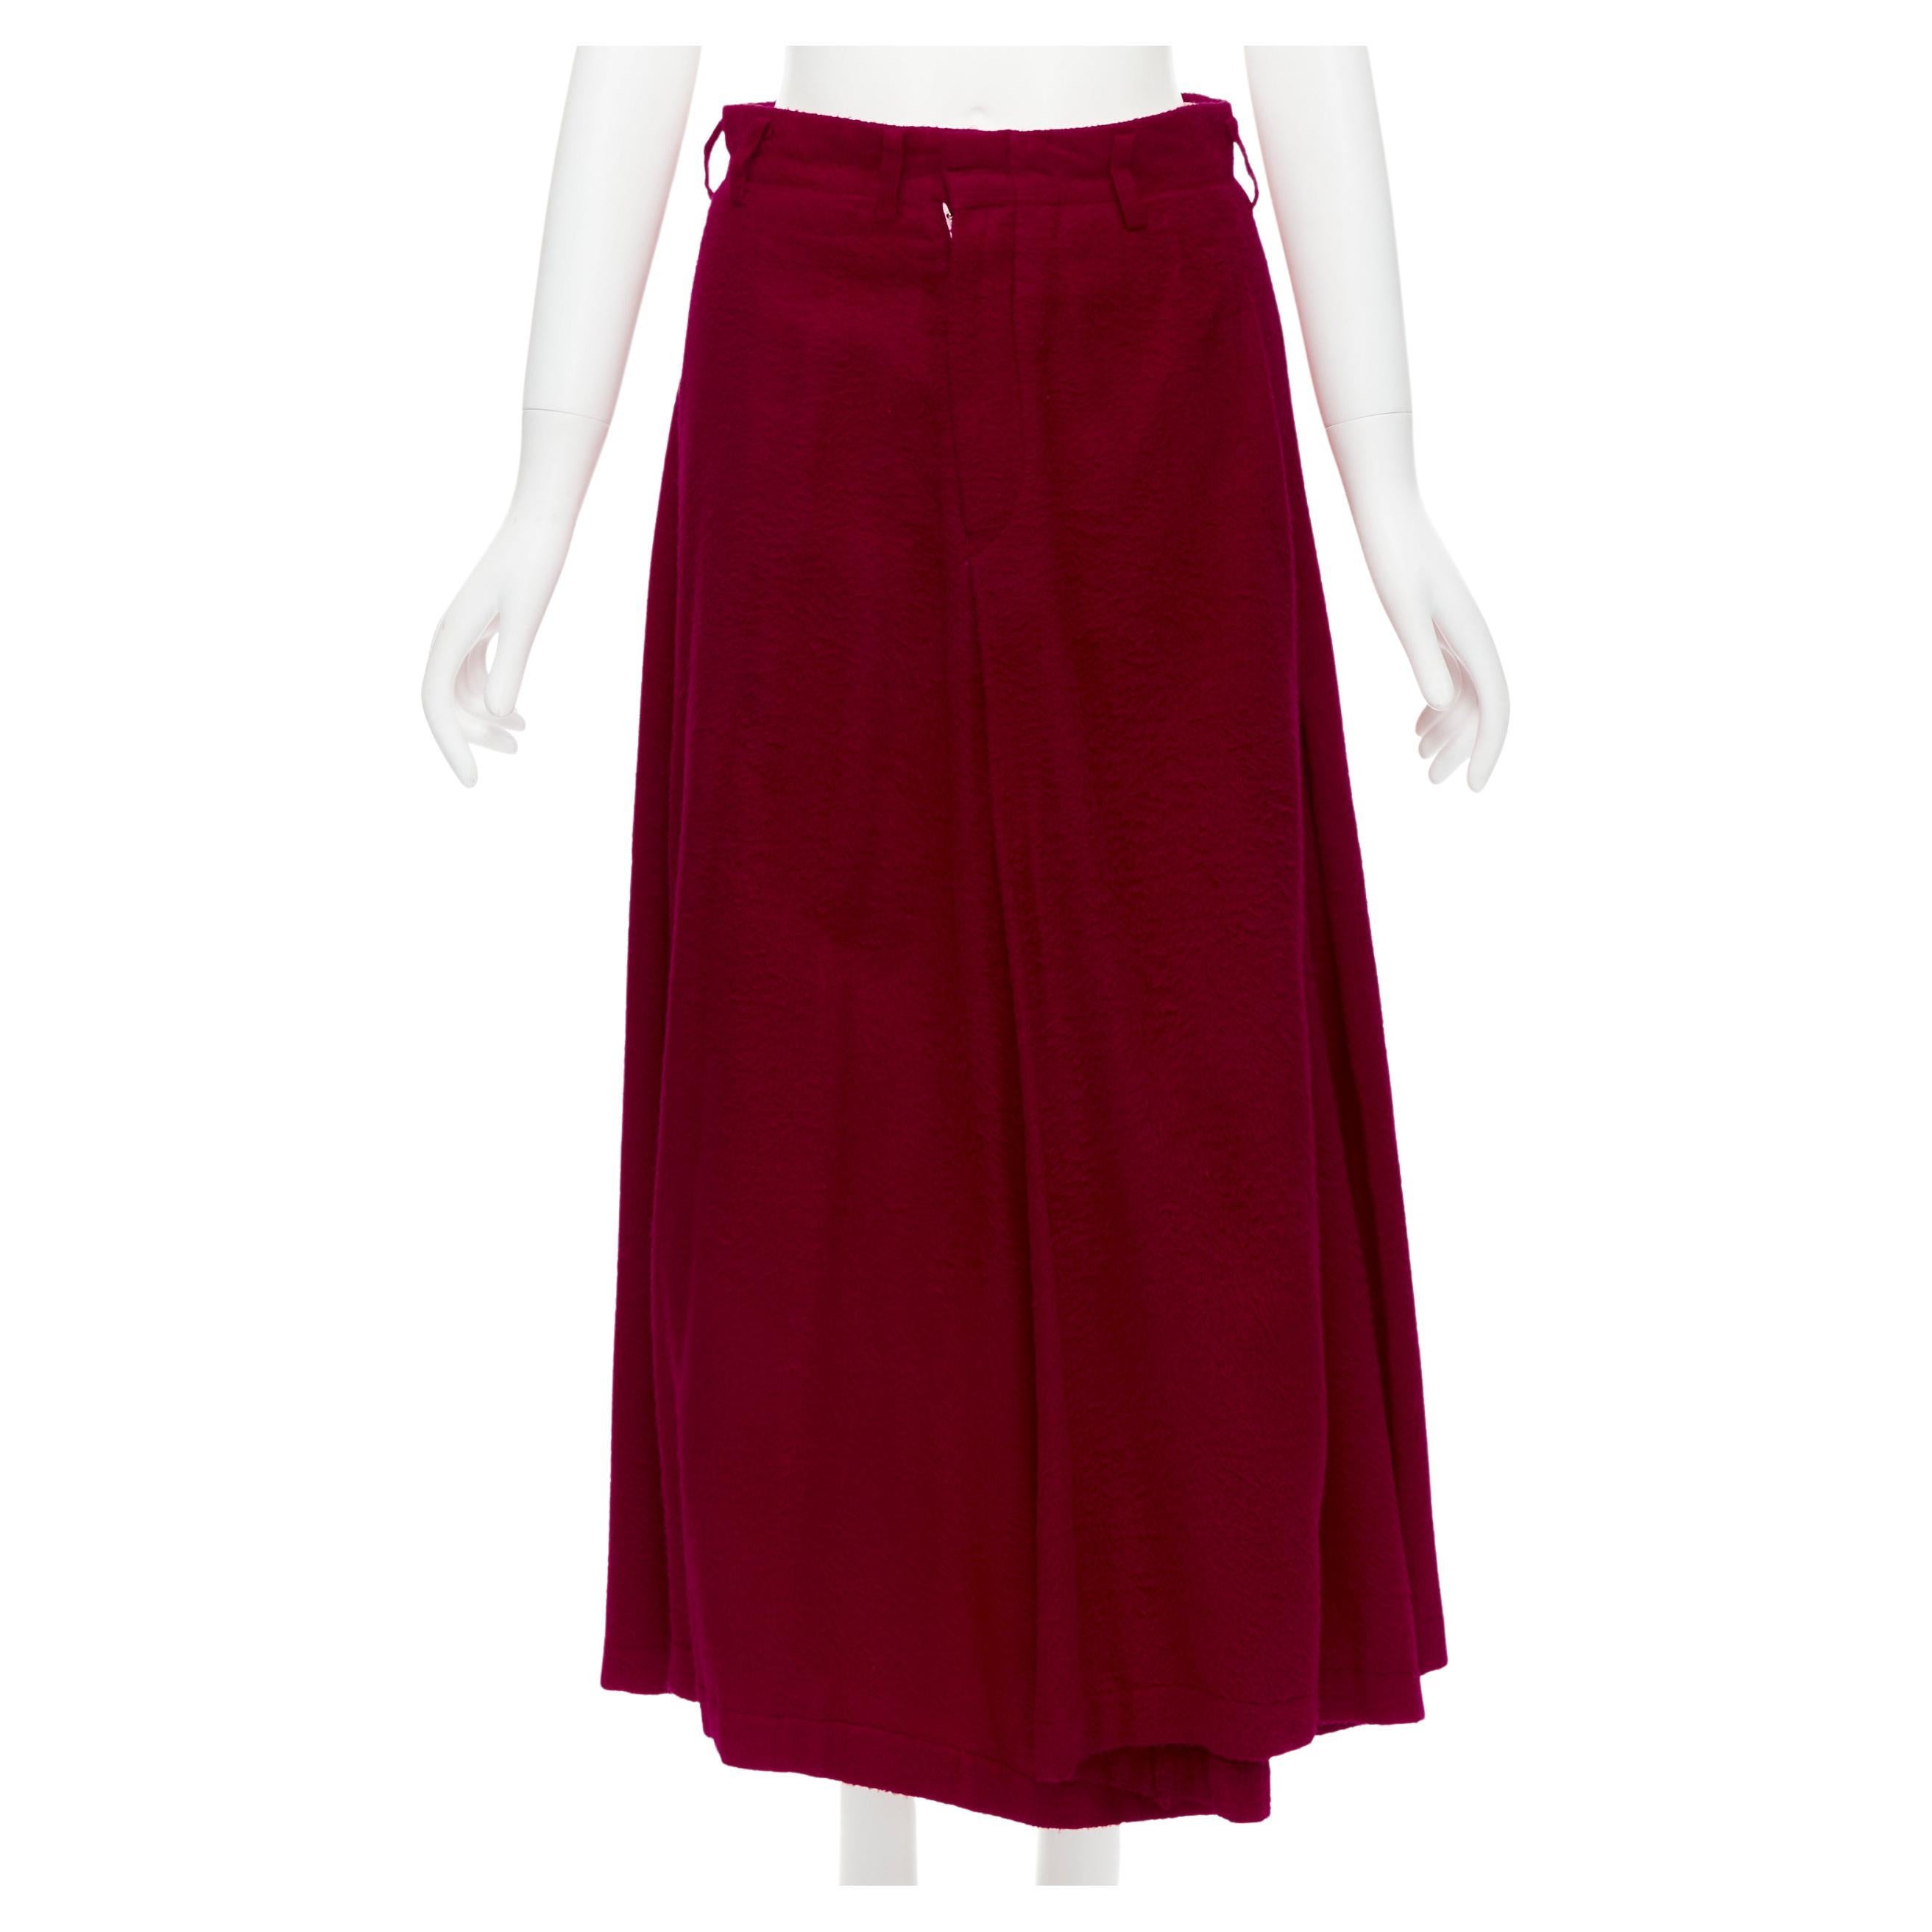 COMME DES GARCONS 1994 red boiled wool diagonal pleat draped midi skirt S